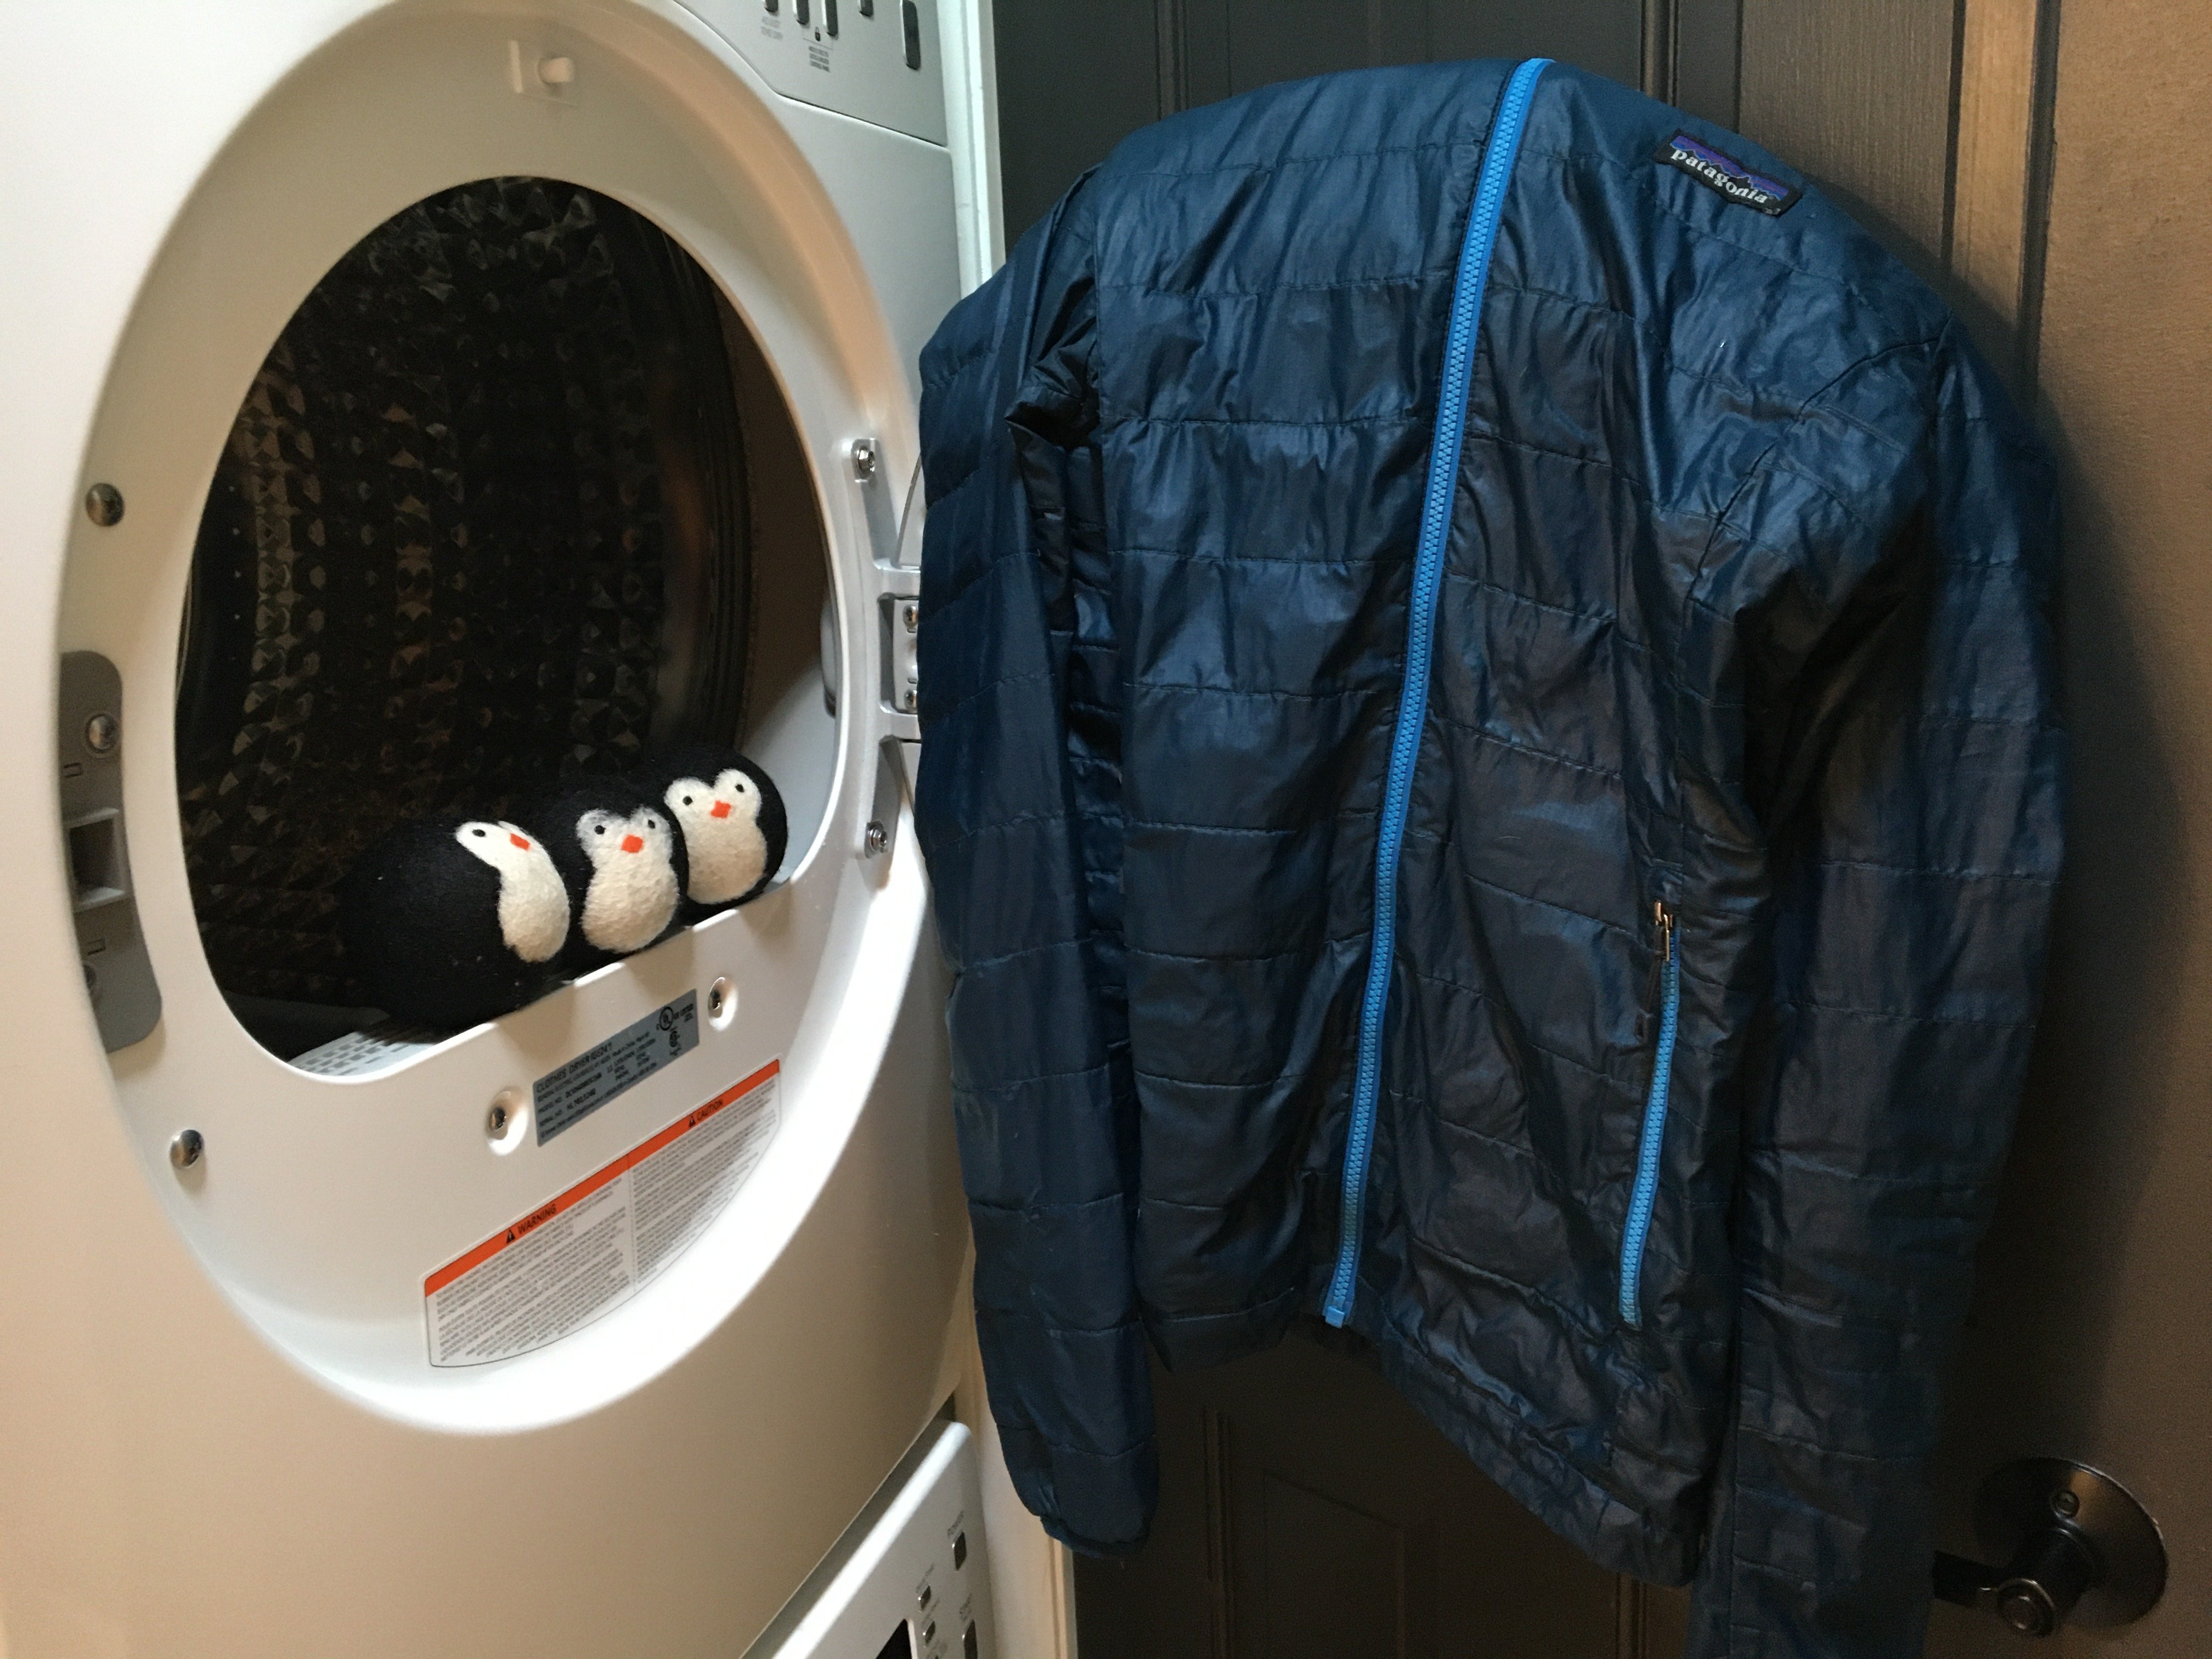 Cleaning & Washing Your Down Jacket [Everything You Need to Know]